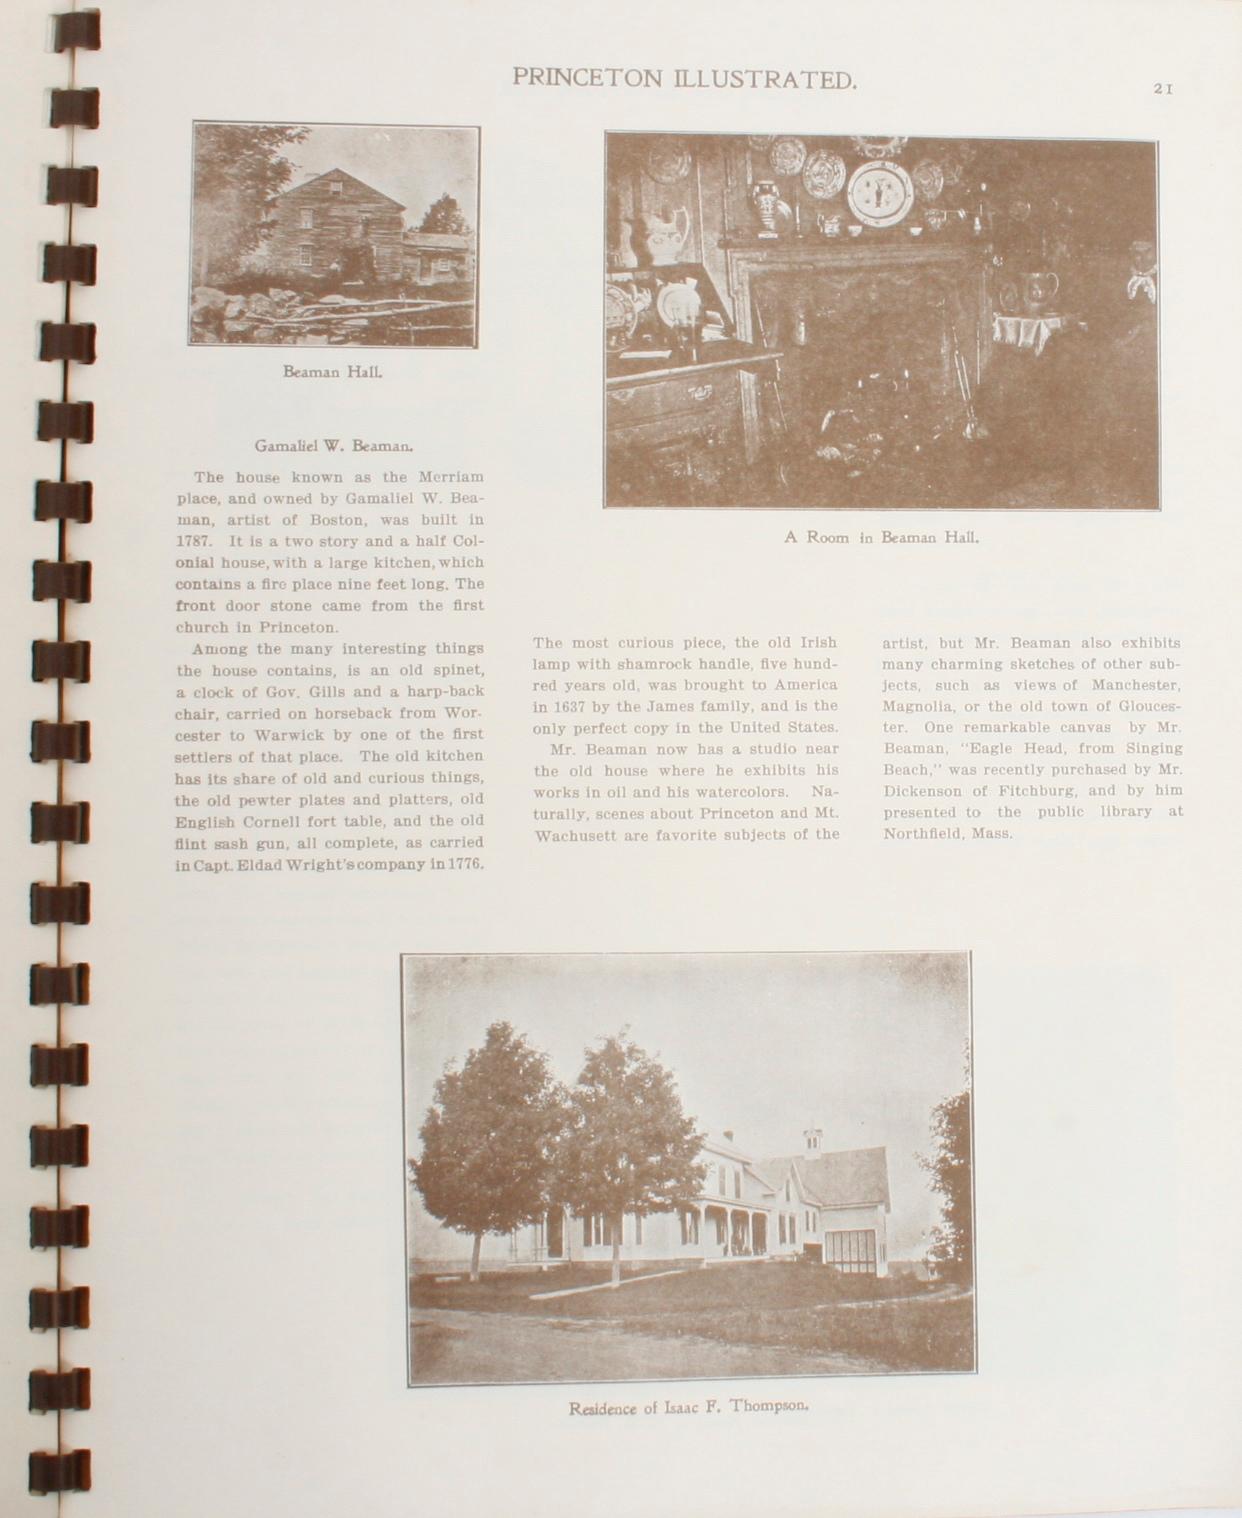 Princeton Mass, Illustrated 1900, as of 1972 6